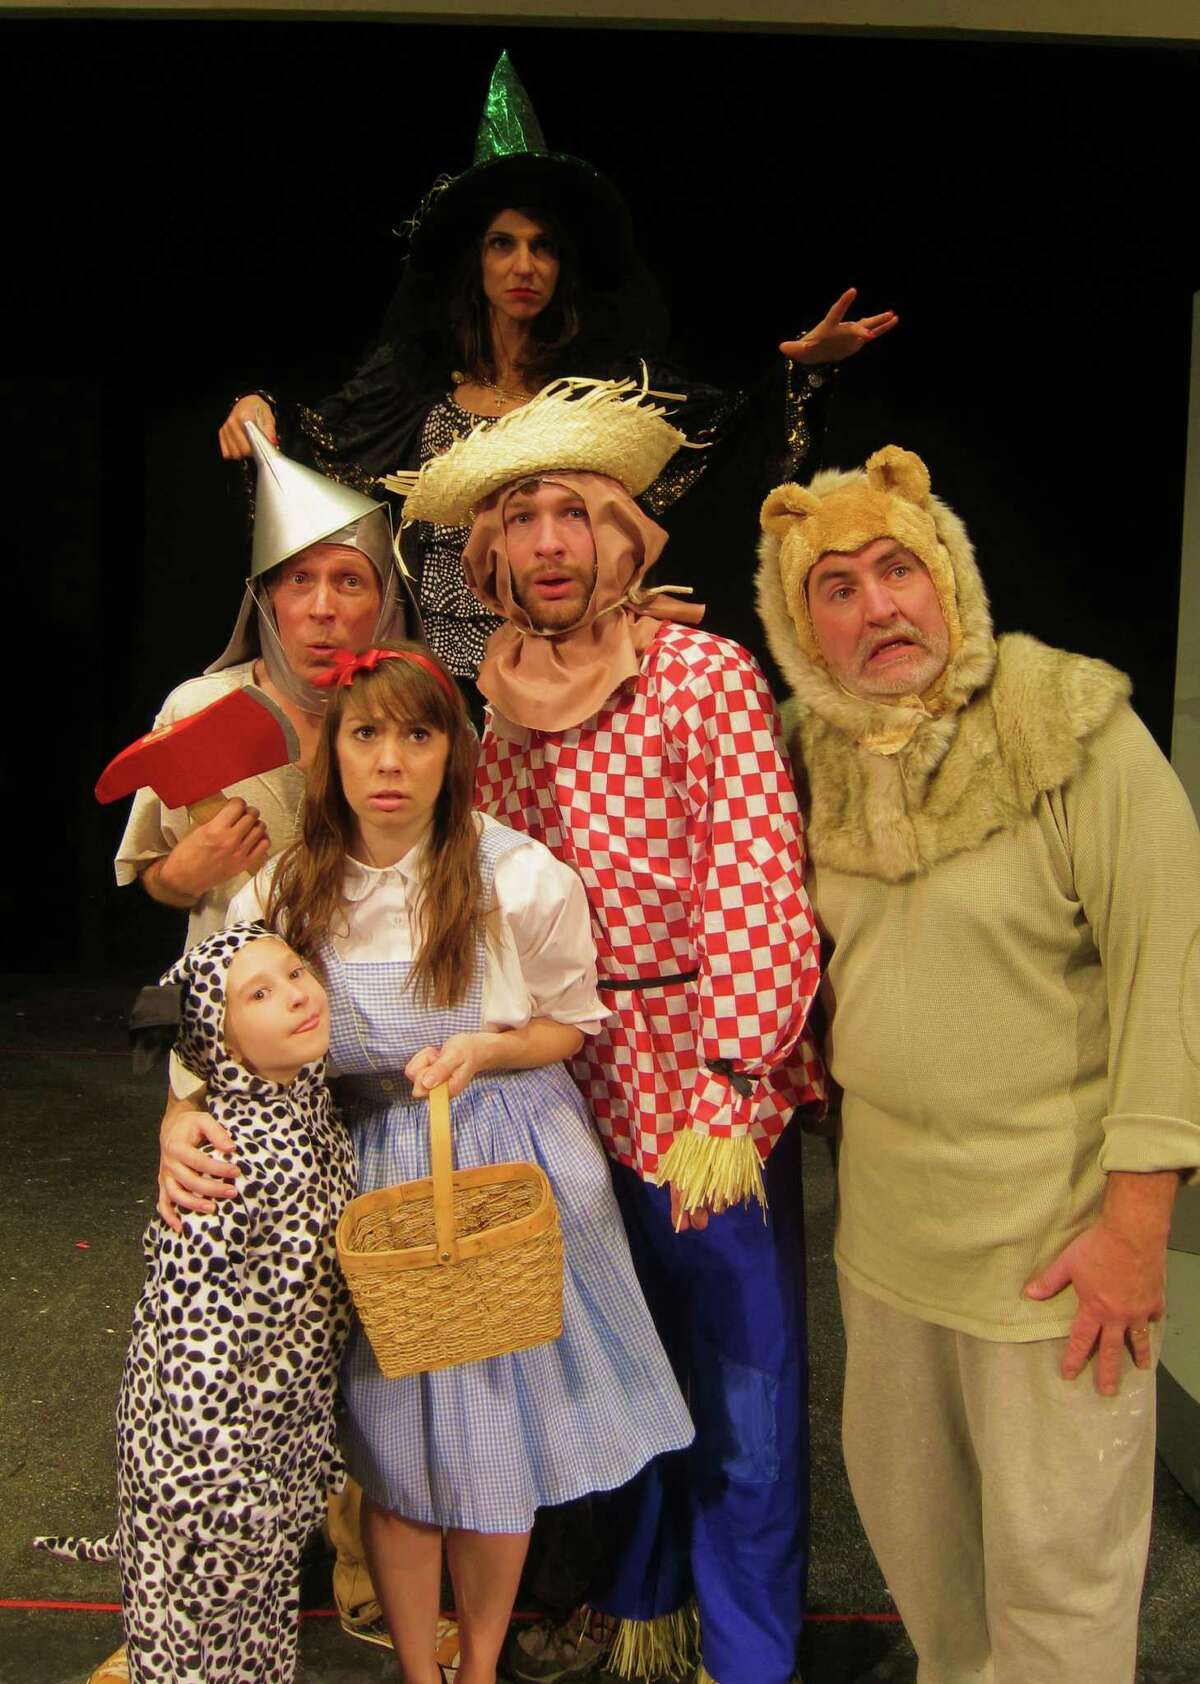 Toto (Caroline Whitaker), Dorothy (Kathryn Starczewski); middle: Tin Woodman (Alan Edstrom), Scarecrow (Conrad Browne Lorcher), Lion (Pat Leathem); back: Wicked Witch of the West (Gloria Ford) in Home Made Theater's production of "The Wizard of Oz," through Dec. 15, 2012. (Home Made Theater)